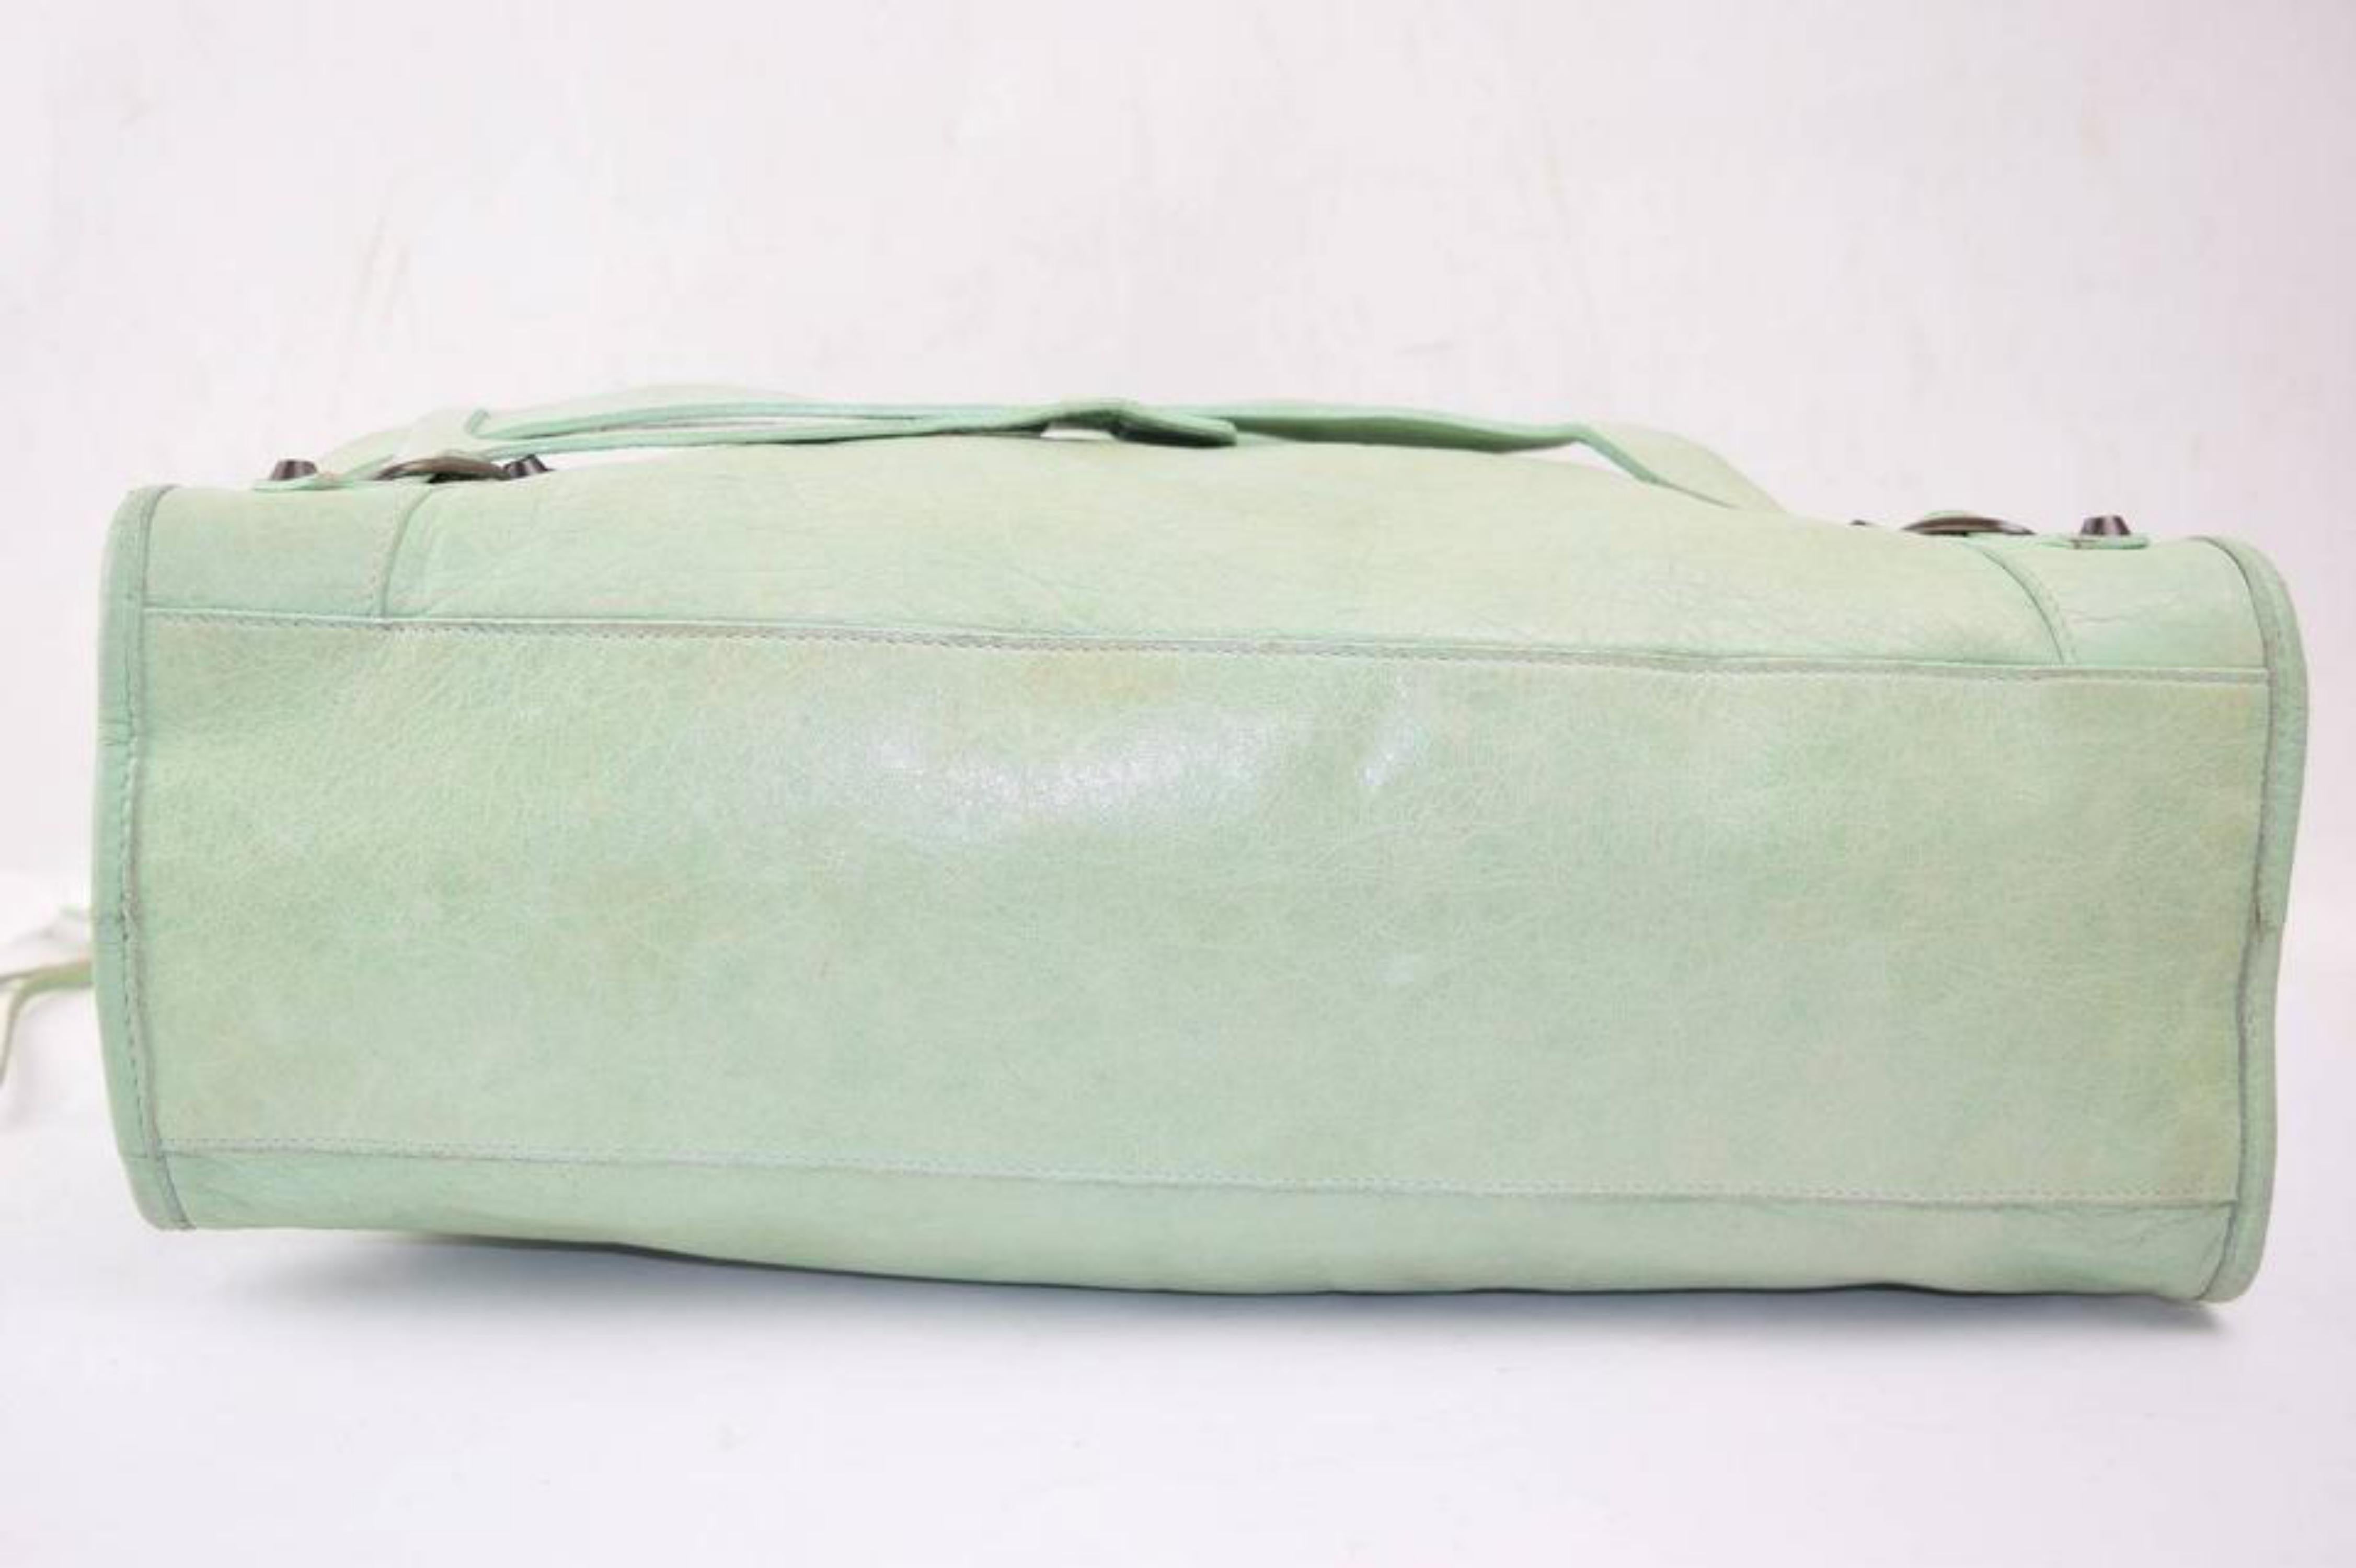 Balenciaga Mint City 2way 869570 Green Leather Shoulder Bag In Good Condition For Sale In Forest Hills, NY